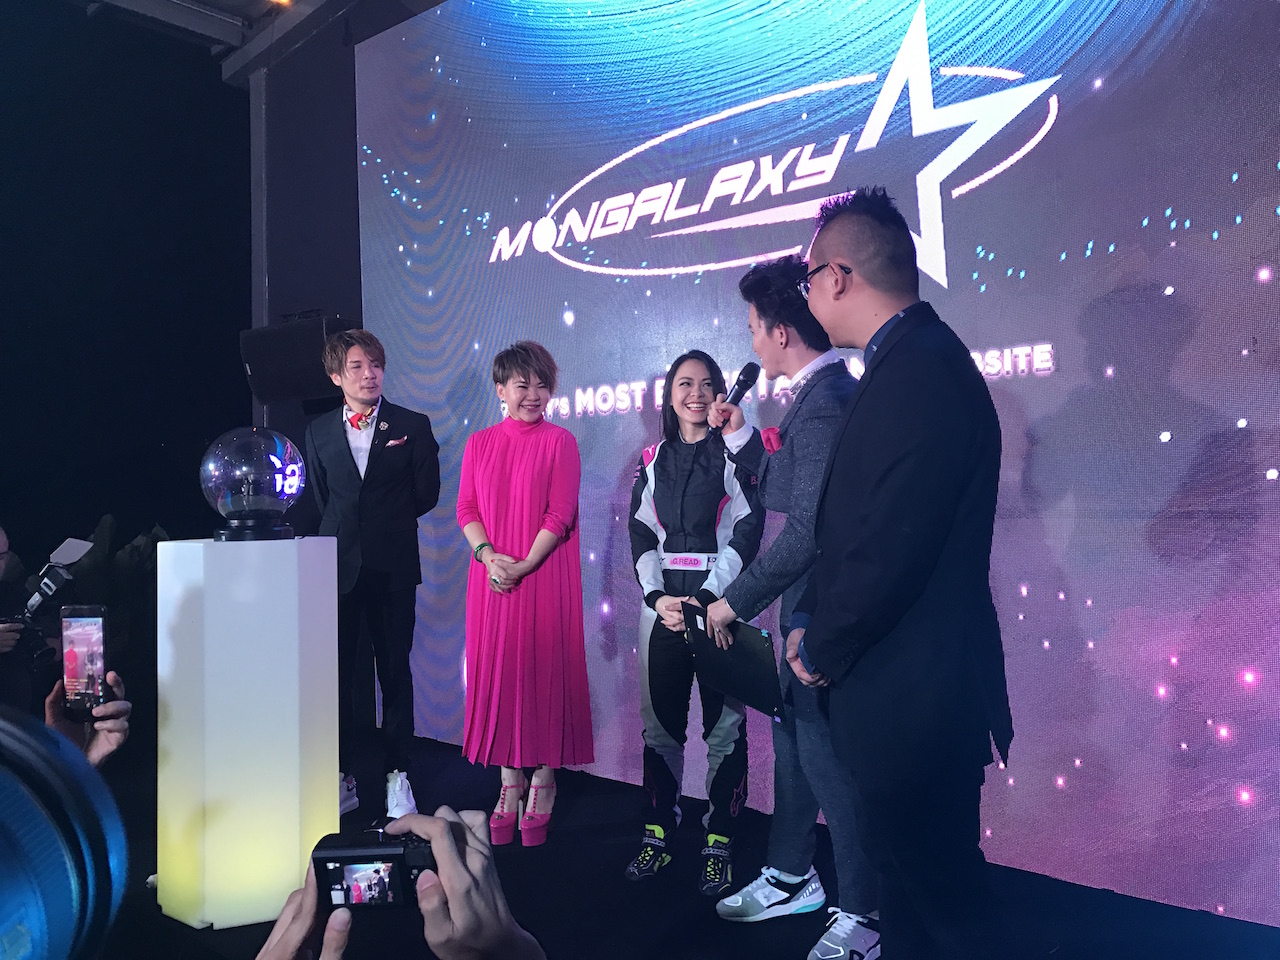 At the launch of the MonGalaxy app, the MonSpace Mall also introduced Geraldine Read, Malaysia's first female race car driver, as their new ambassador.